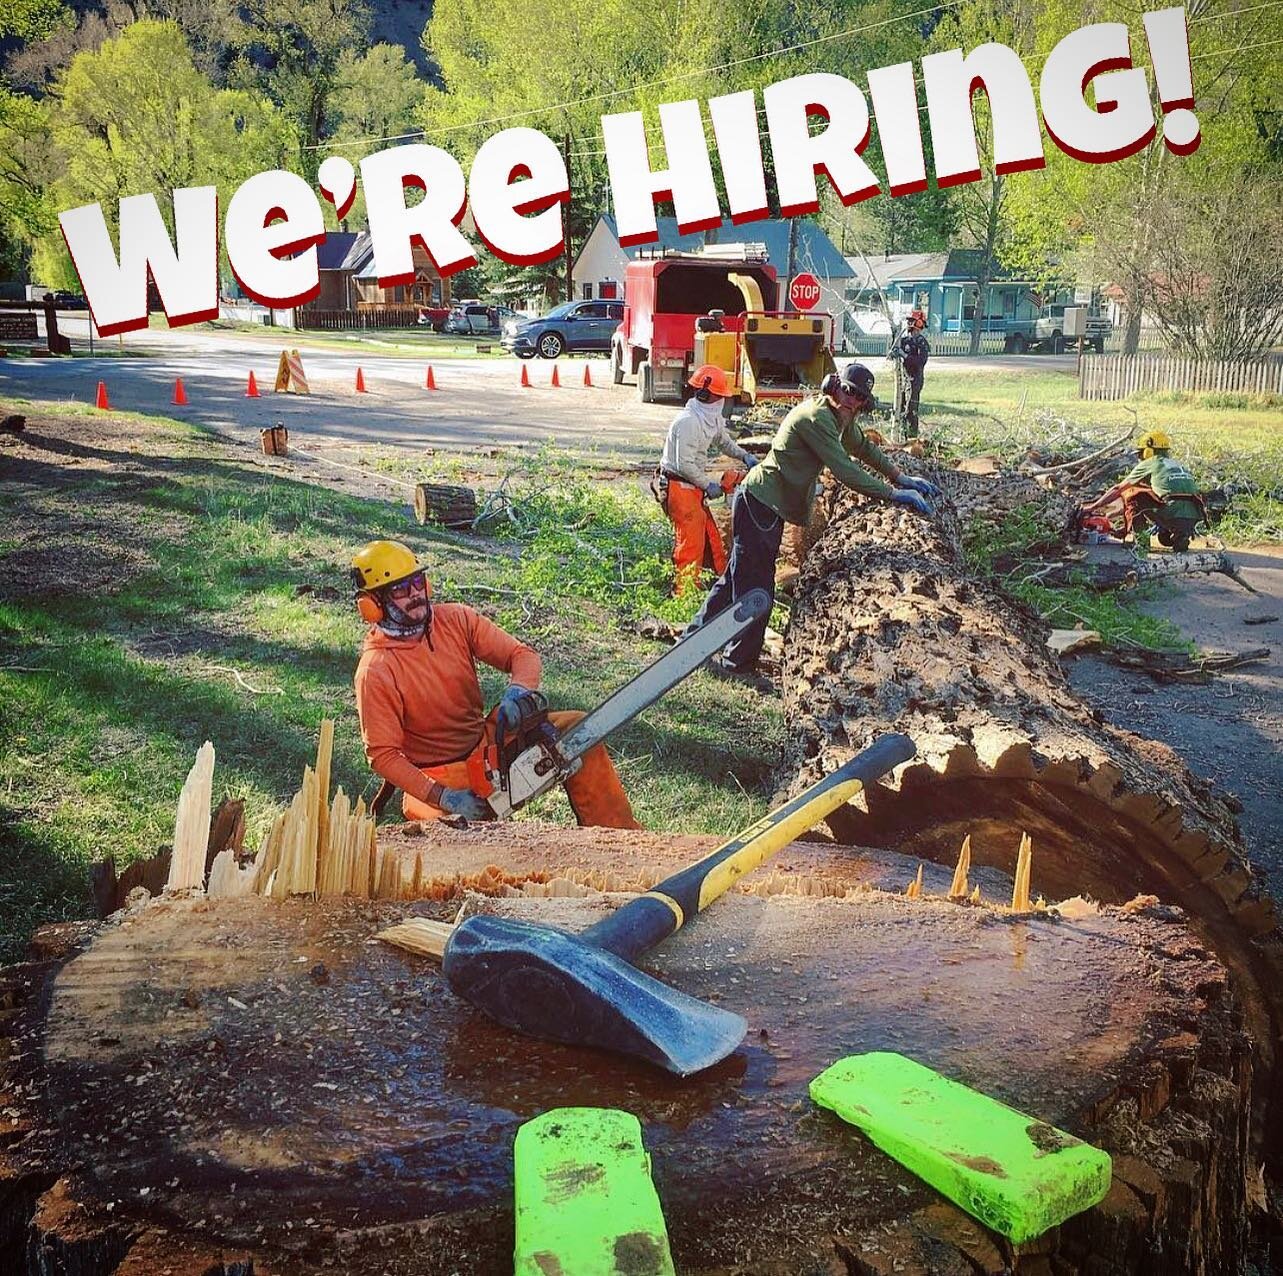 We are looking for stoked people to join our tree care team! Do you want to work outside in the San Juan mountains this summer and learn about forestry and urban tree care? Do you want to skip going to the gym and instead get paid to get buff?
This i